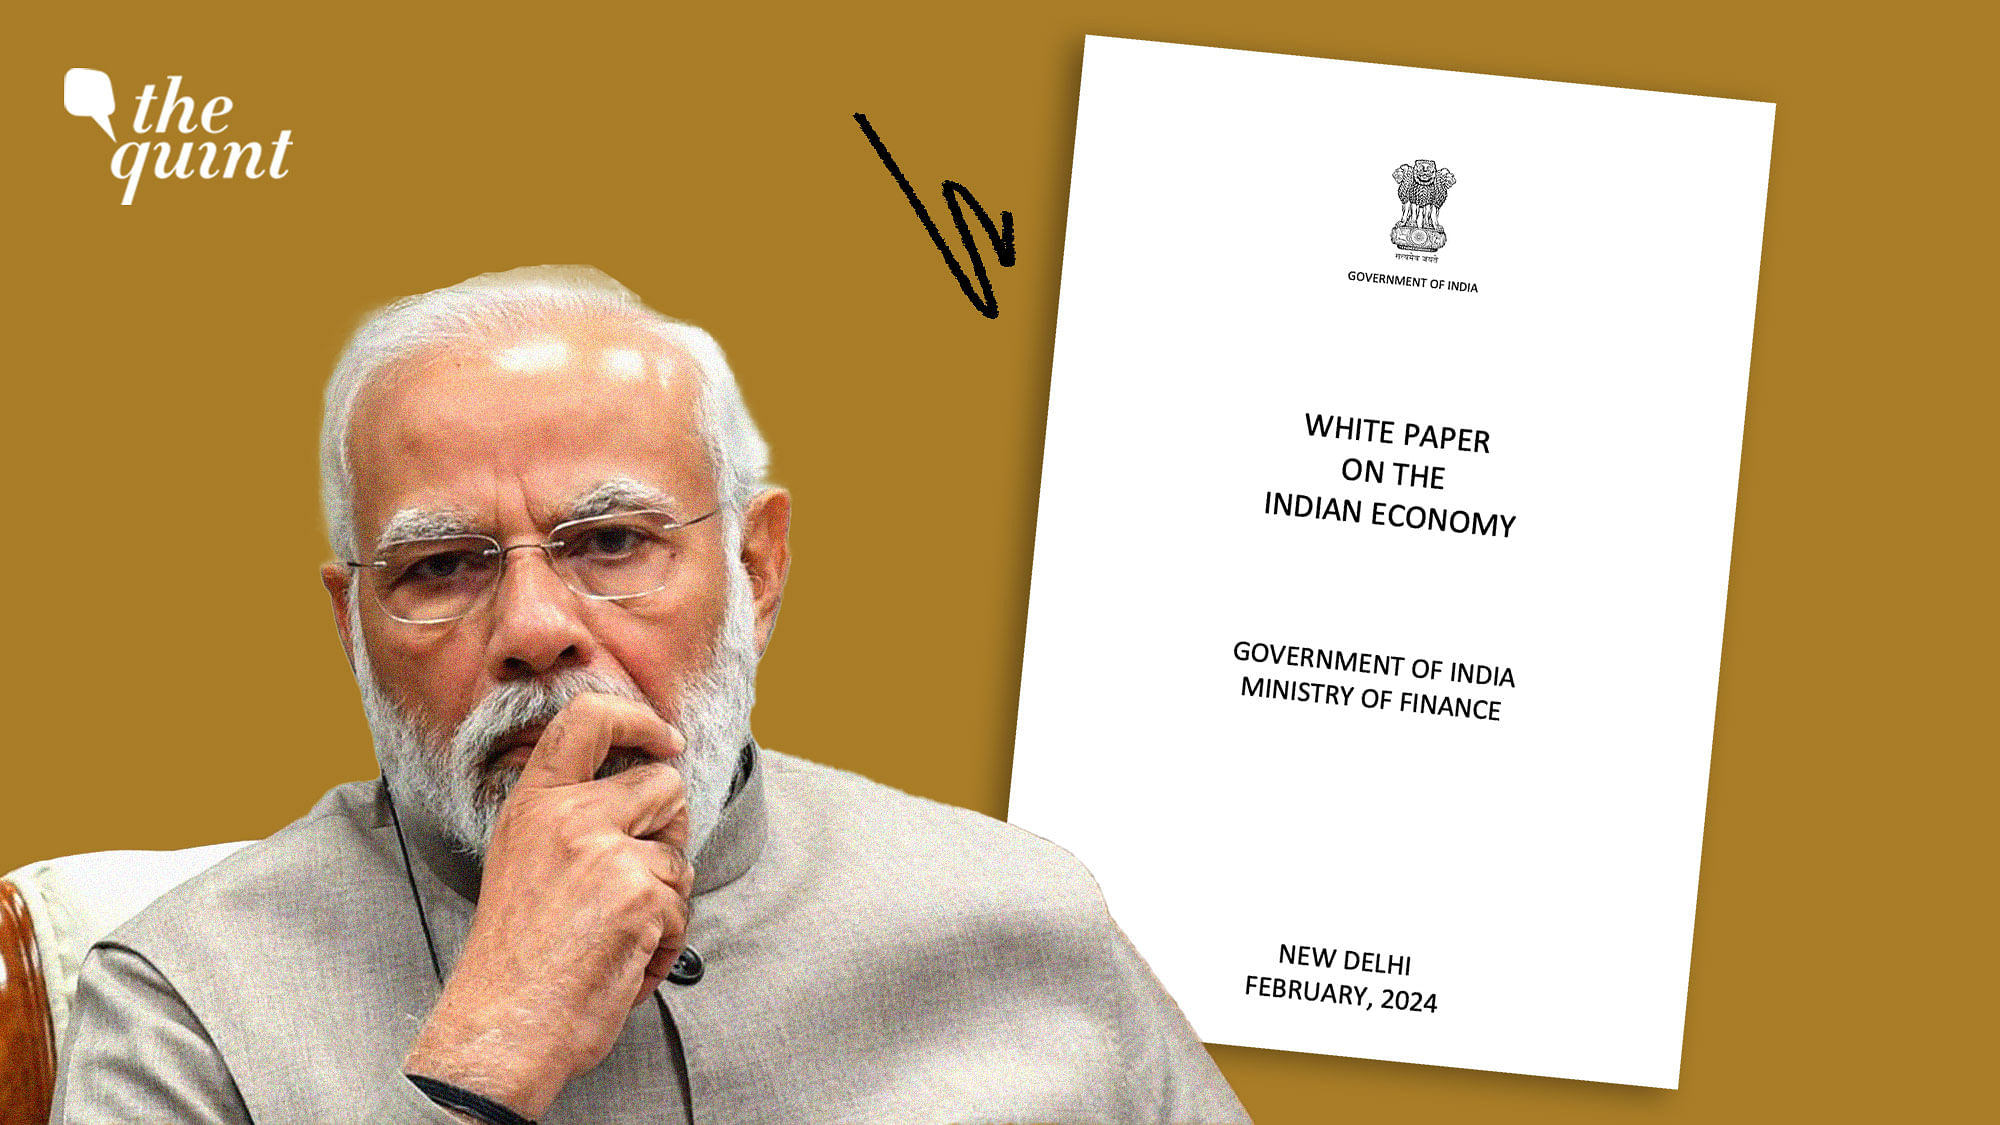 <div class="paragraphs"><p>The White Paper says that <em><strong>the UPA Government inherited a healthy economy ready for more reforms, but made it non-performing in its ten years</strong></em>.</p></div>